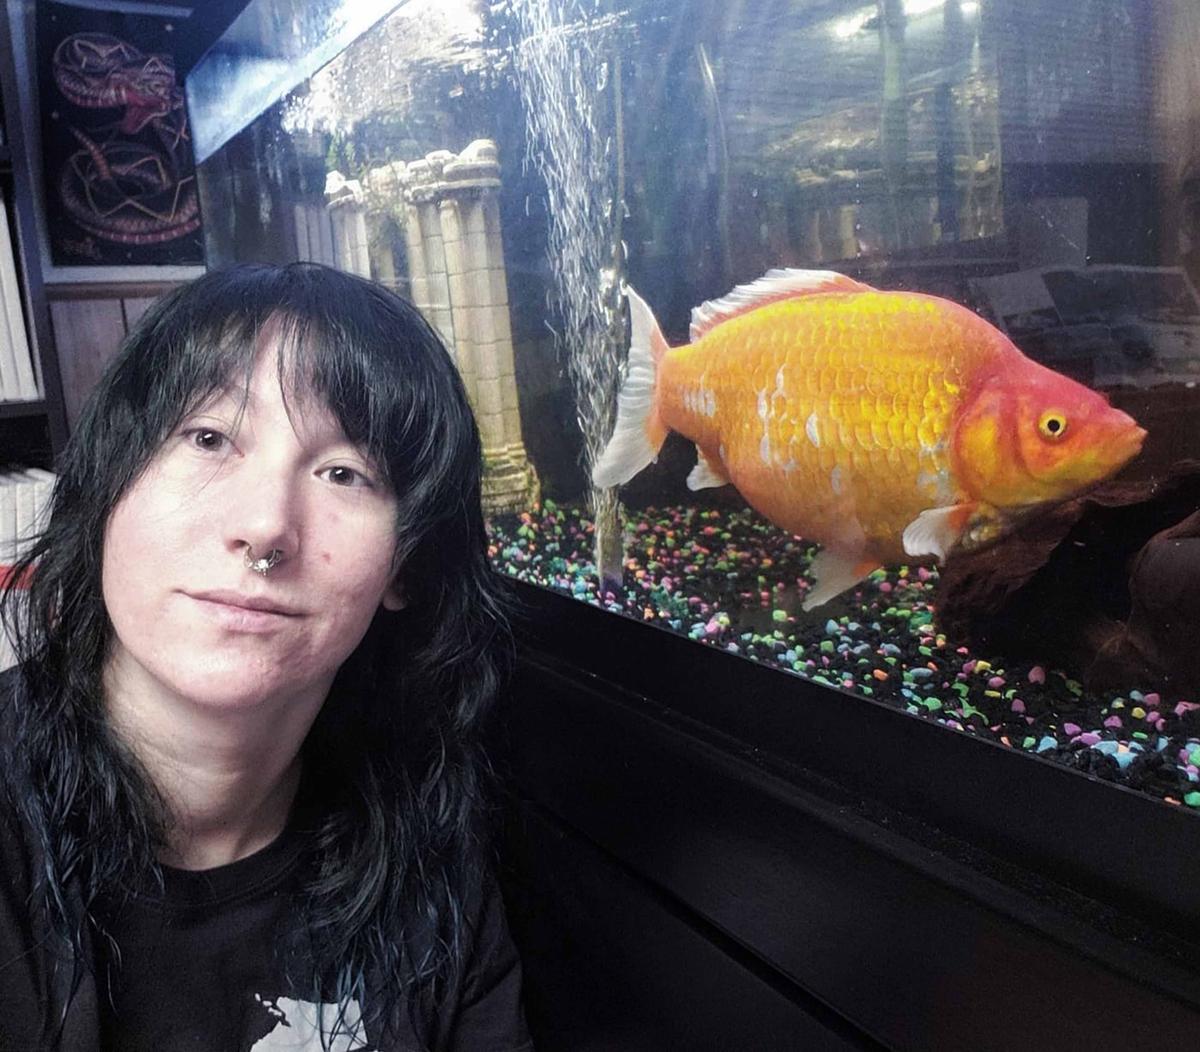 Gerald the goldfish appeared to be a standard-size goldfish when Alexandria Miller, 28, won him in July 2018. (Caters News)